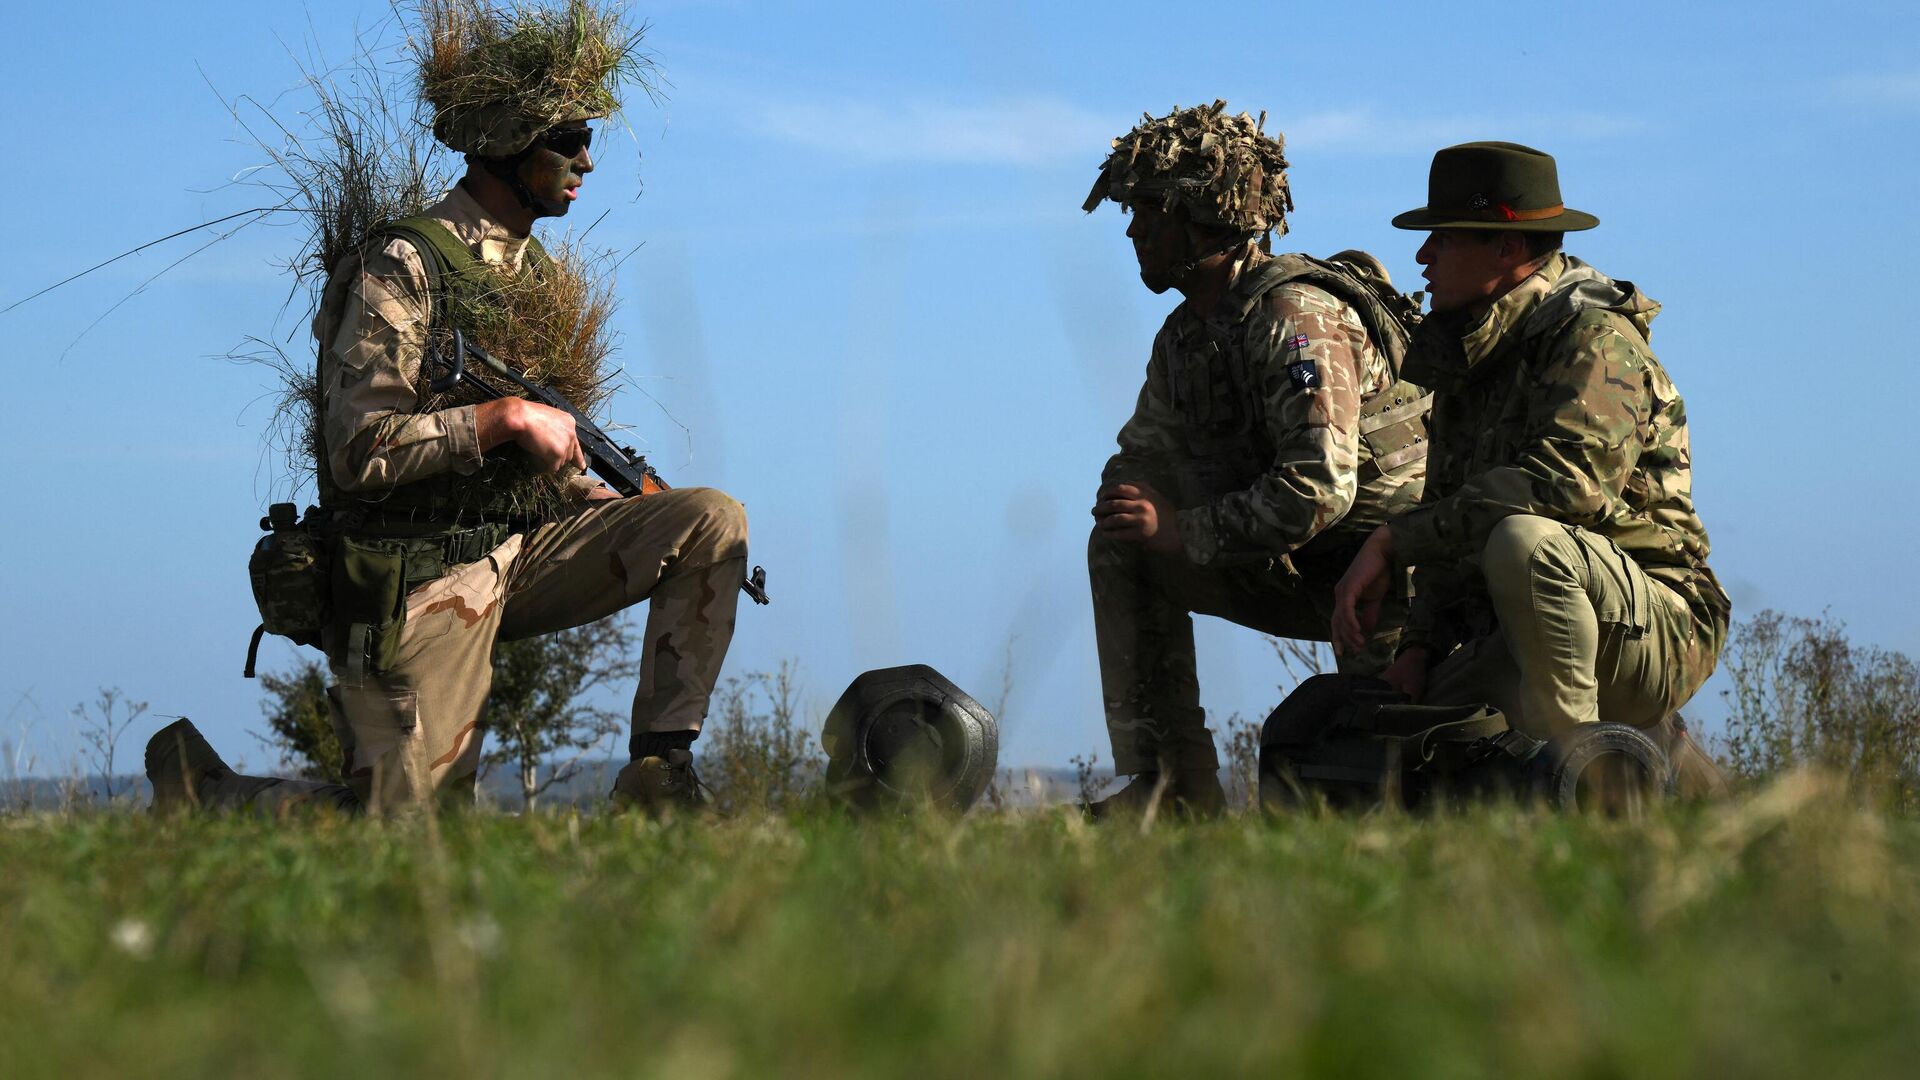 A Ukrainian recruit speaks with instructors during a five-week combat training course with the UK armed forces near Durrington in southern England on October 11, 2022 - Sputnik International, 1920, 02.02.2023